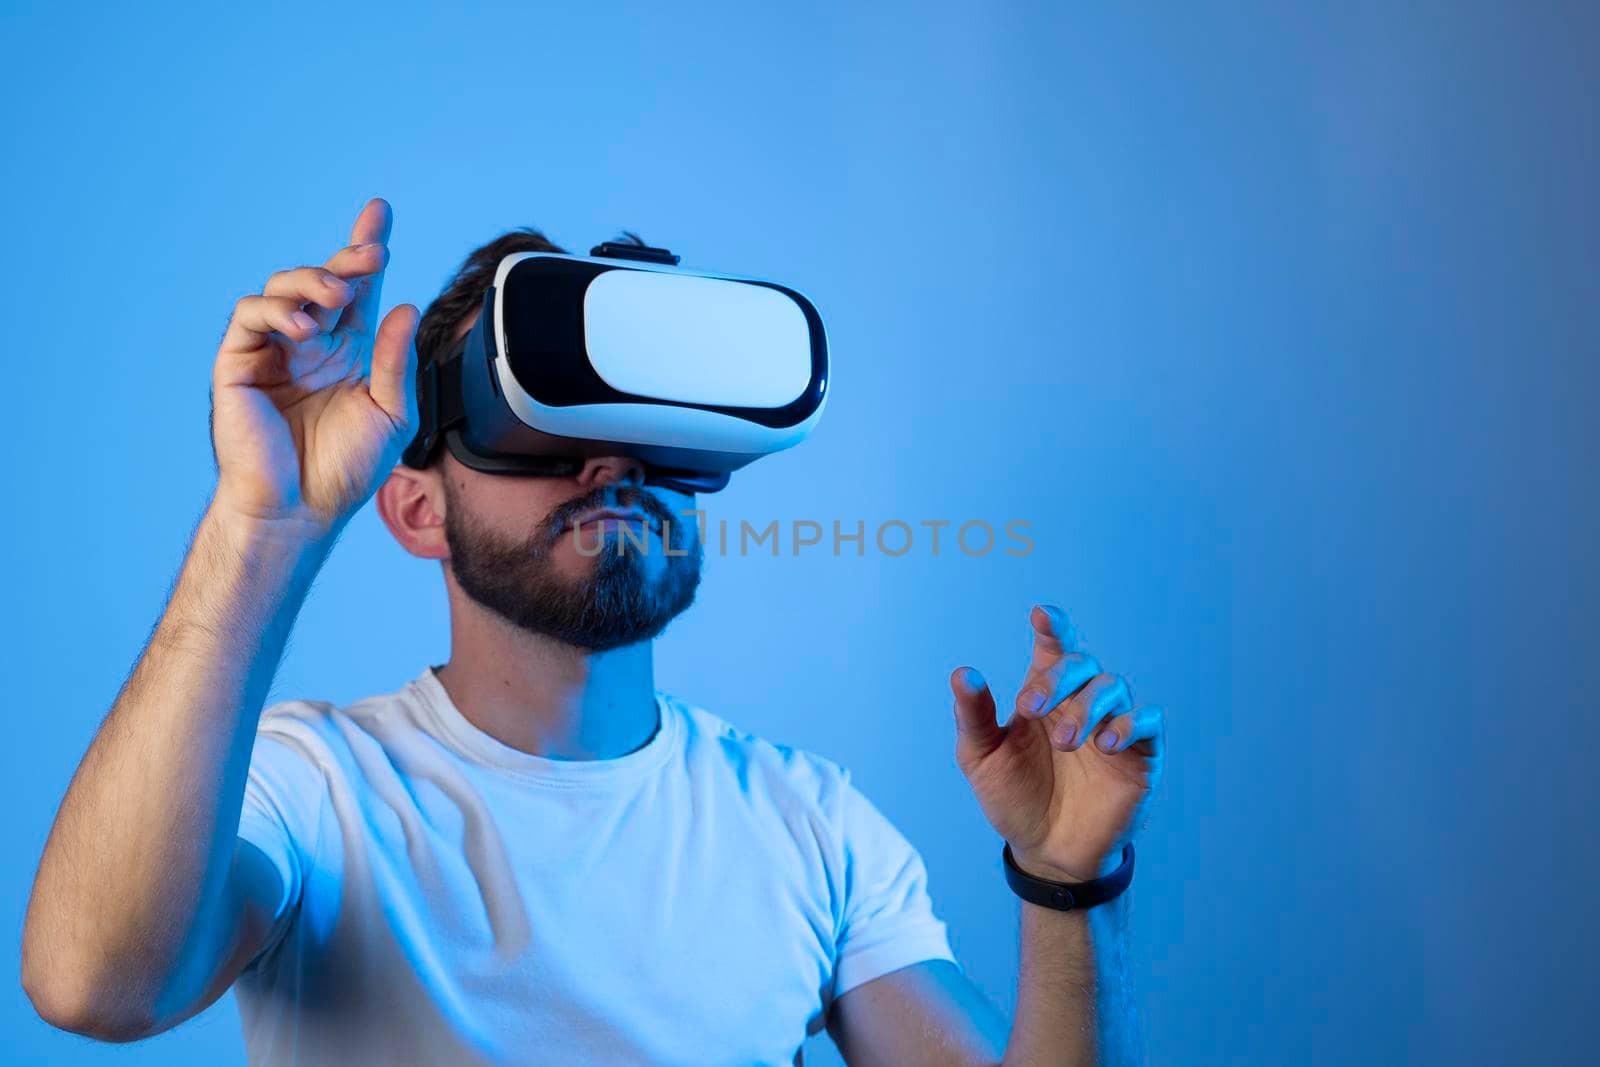 Bearded man using VR headset helmet to interacts with metaverse using swipe and stretching gestures. Watching virtual reality 3d video. Man in VR goggles looking around